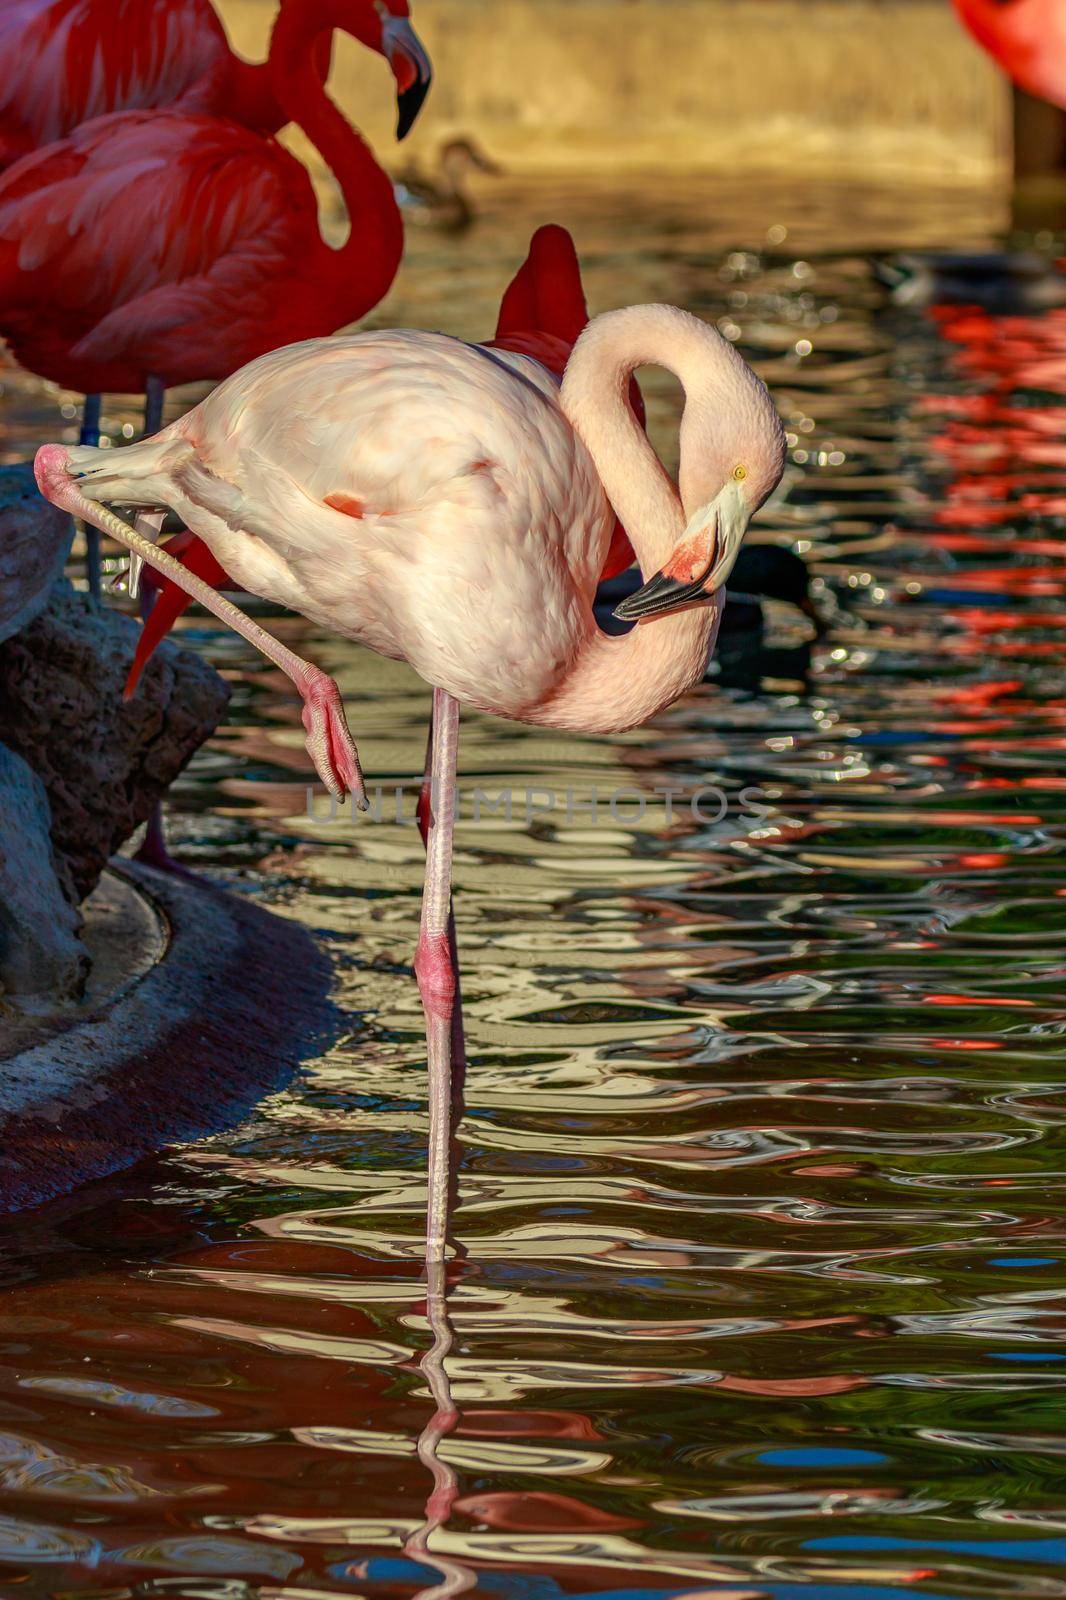 A pink flamingo wading in the water.